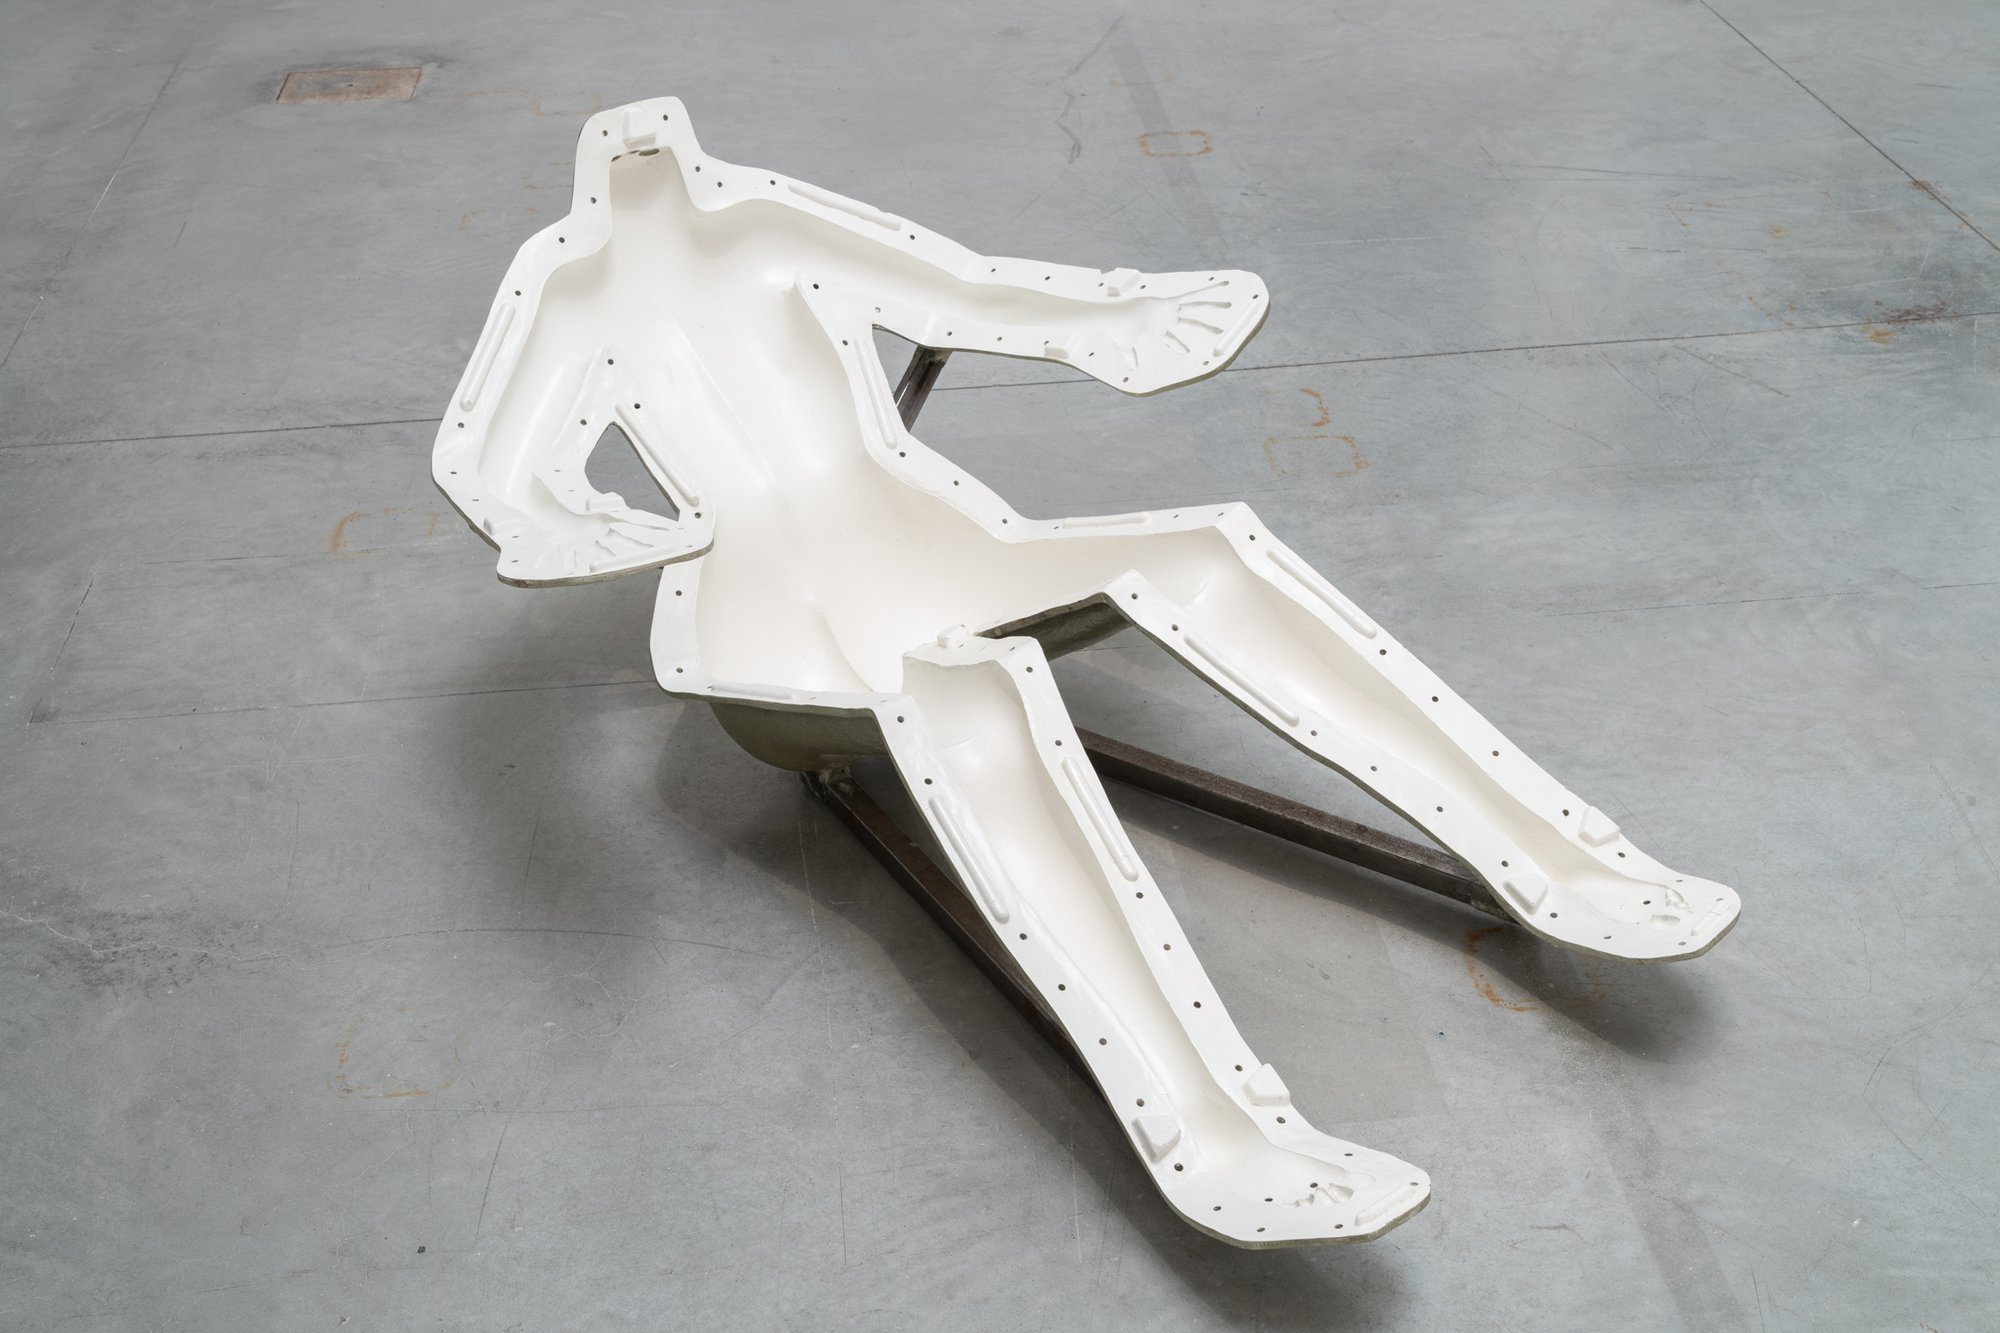 Sidsel Meineche Hansen, Daddy Mould, industrial cast in two parts made from fibreglass, resin and vaseline, 149 × 37 × 92 cm and 149 × 48 × 89 cm (58 5/8 x 14 5/8 x 36 1/4 in and 58 5/8 x 18 7/8 x 35 1/8 in), 2018. Installation view, The Milk of Dreams, 59th International Art Exhibition – La Biennale di Venezia, Venice, 2022